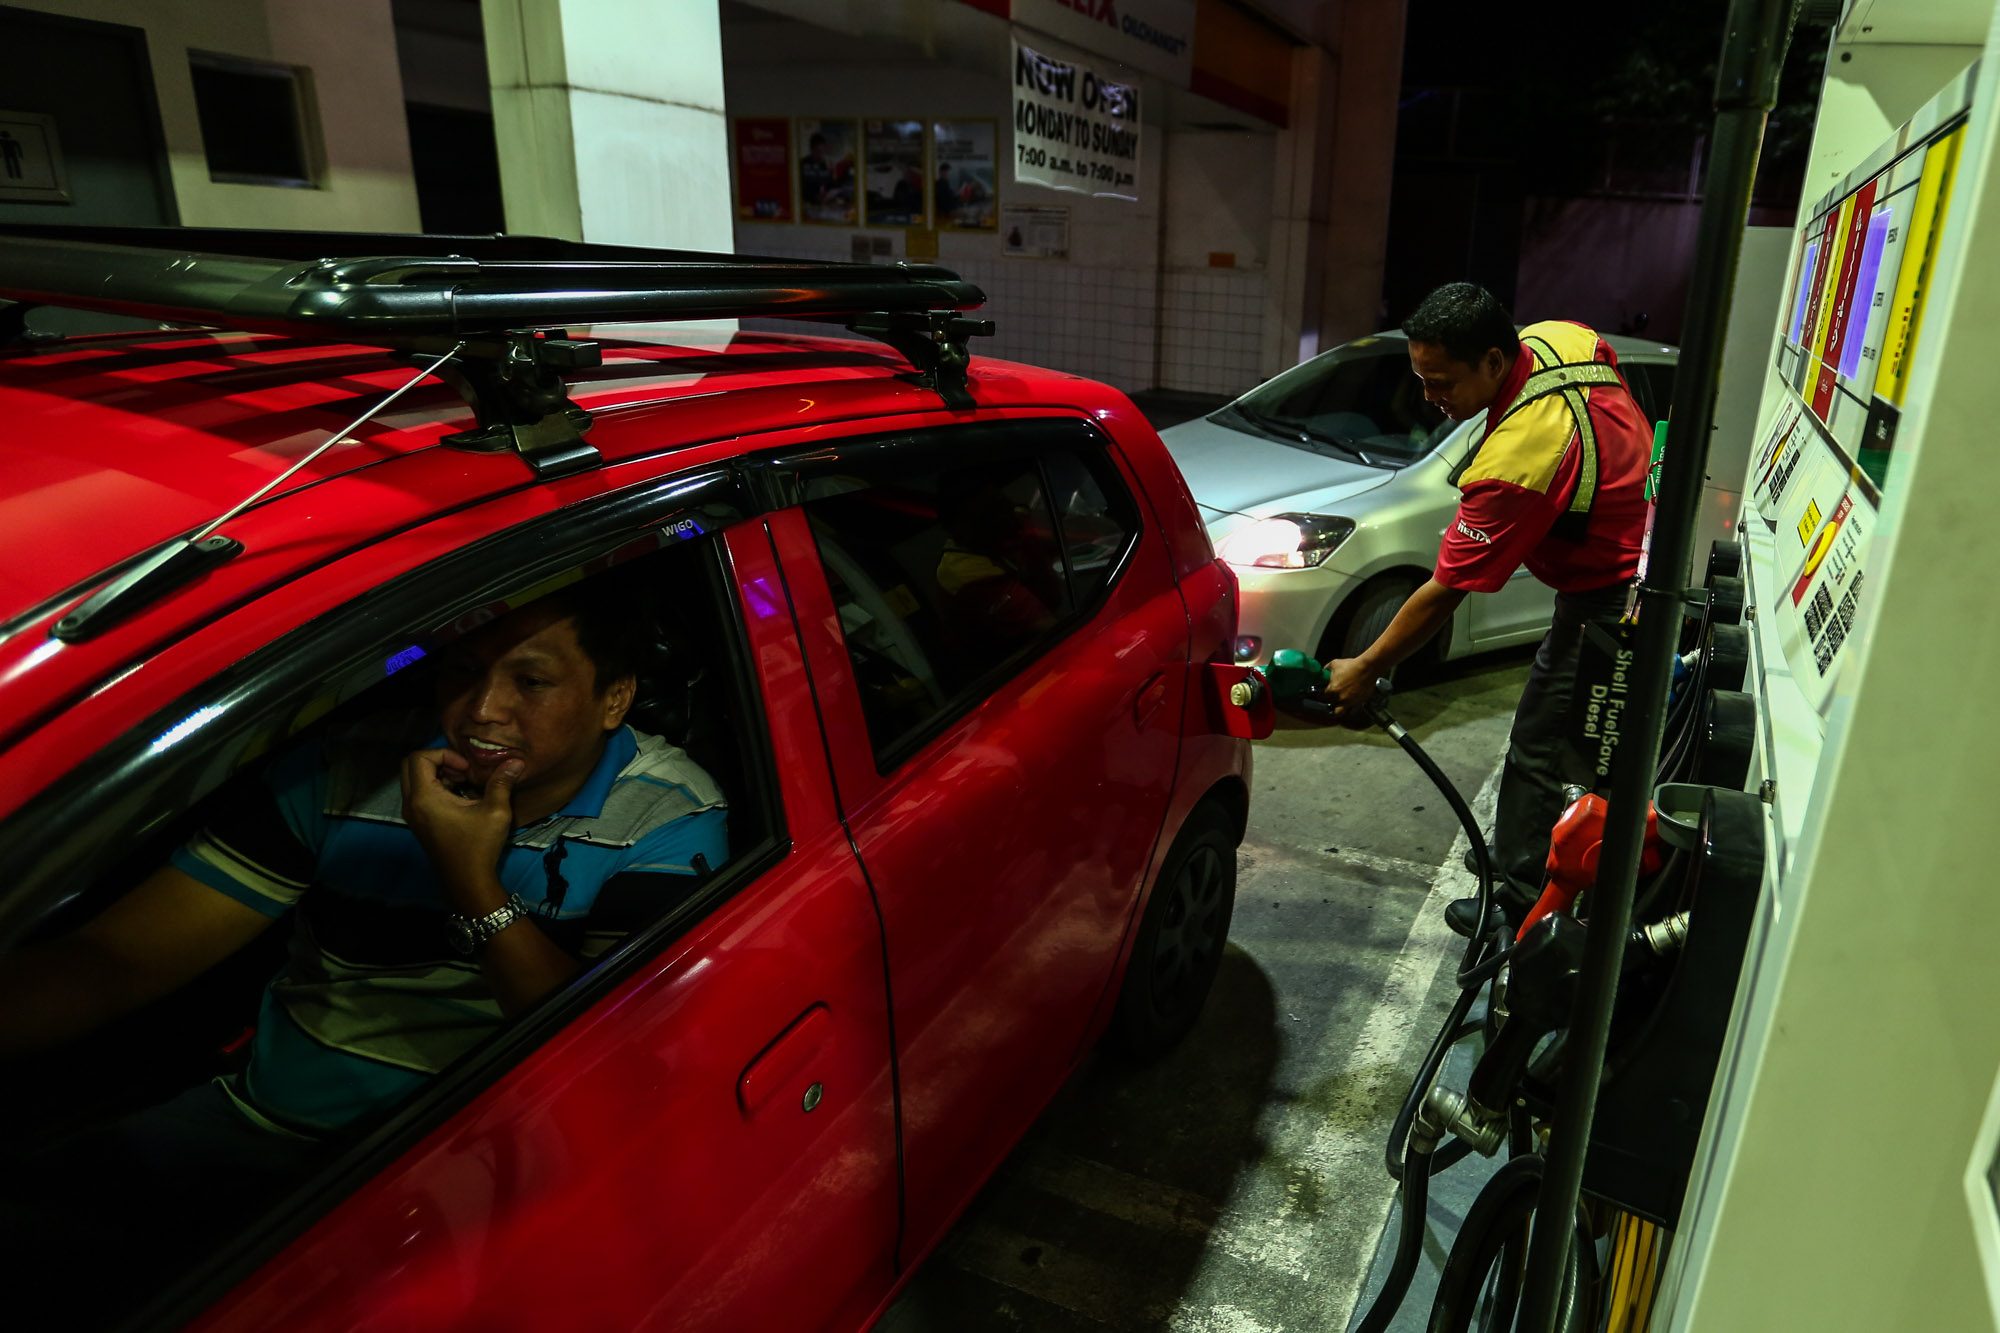 Gasoline prices down, LPG up on October 1